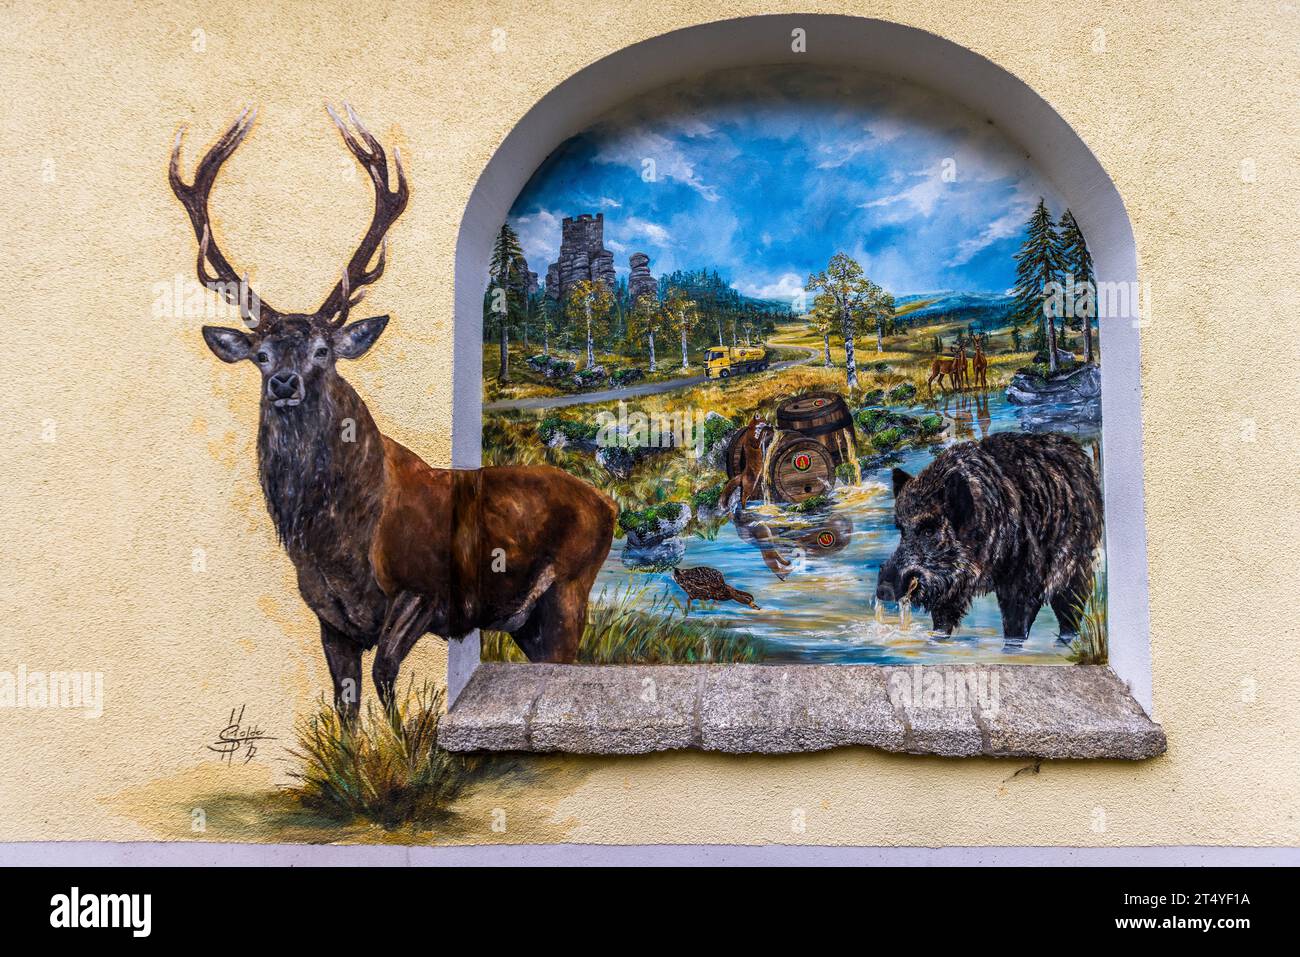 Mural in the village of Friedenfels, showing deer, wild boar and beer barrels by the river as well as the Friedenfelsen rock that gives the village its name Friedenfels, Germany Stock Photo